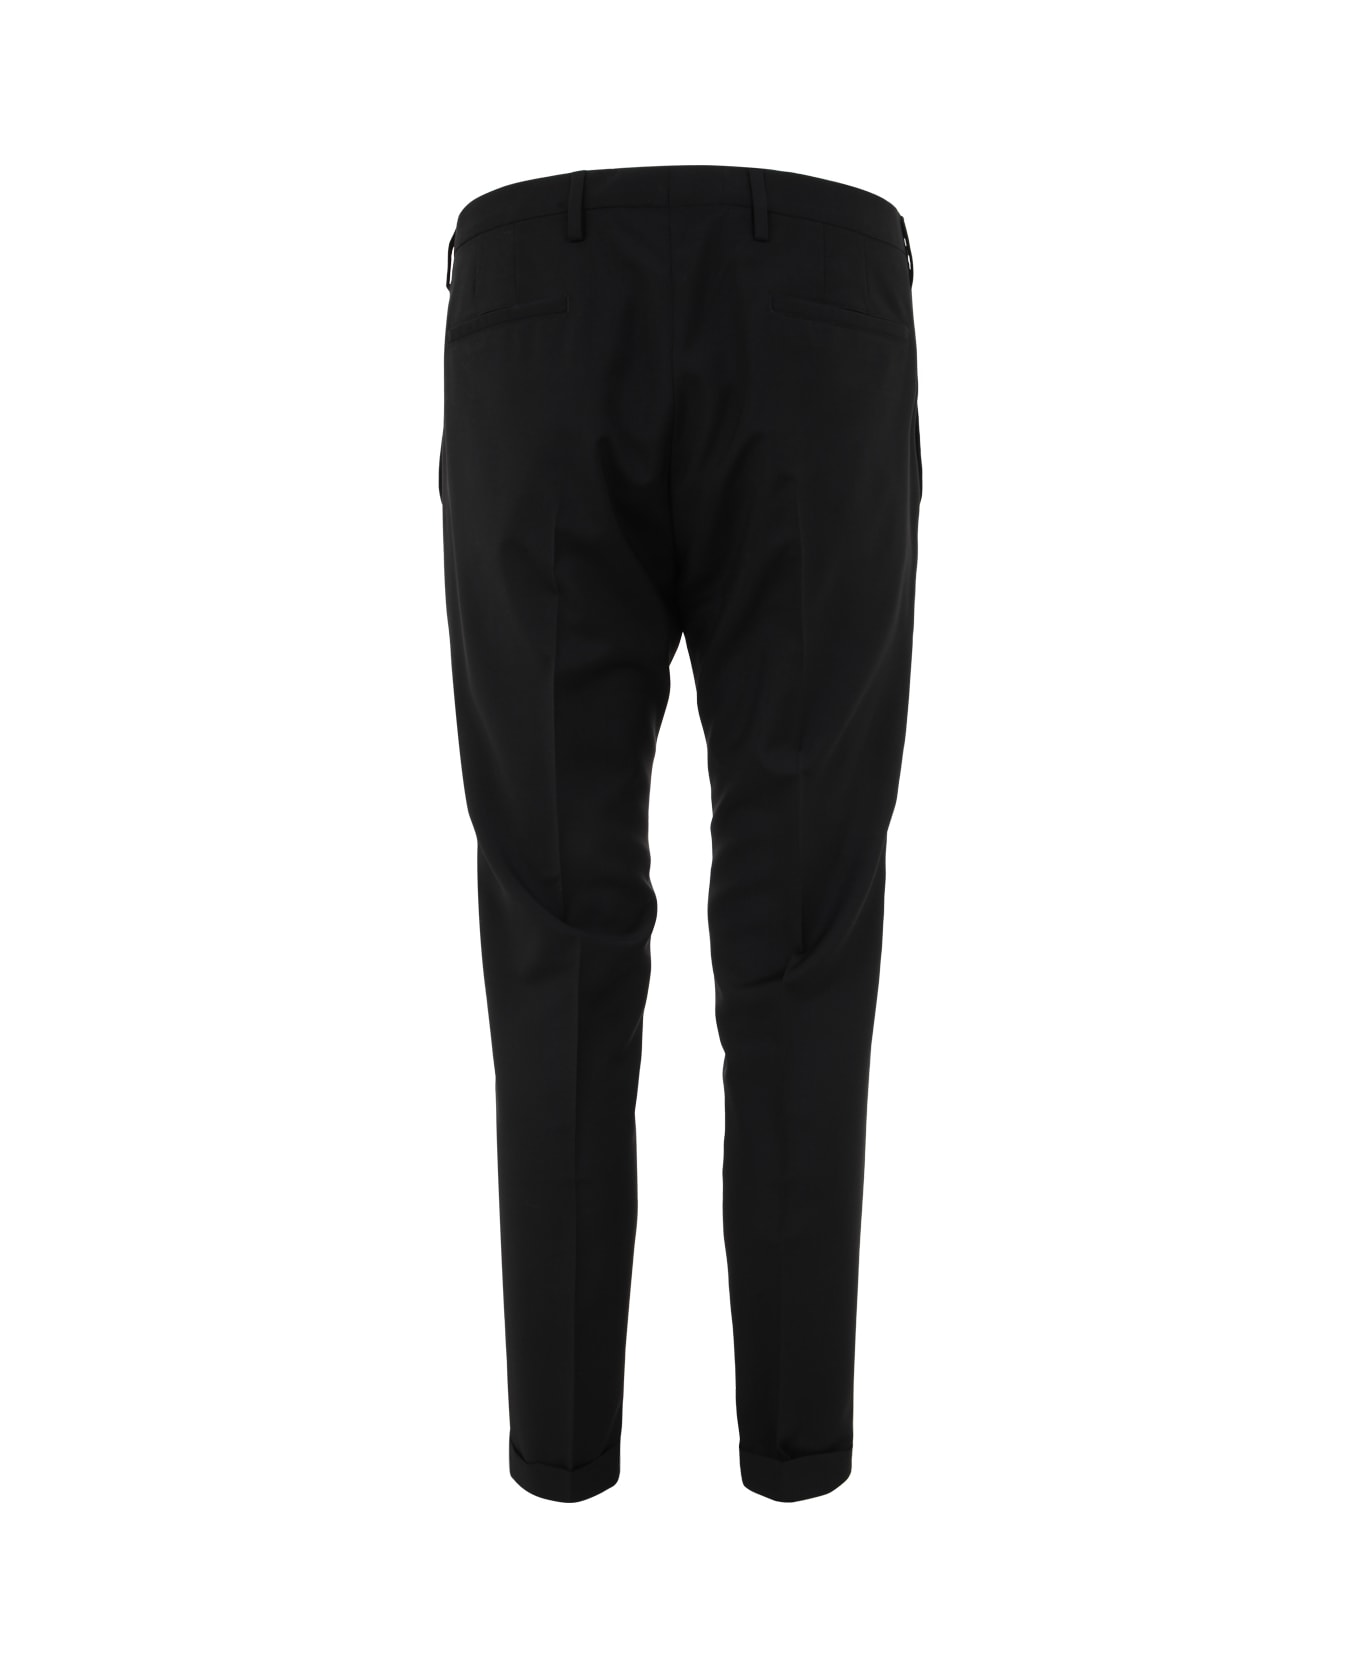 Paul Smith Mens Trousers - Black ボトムス